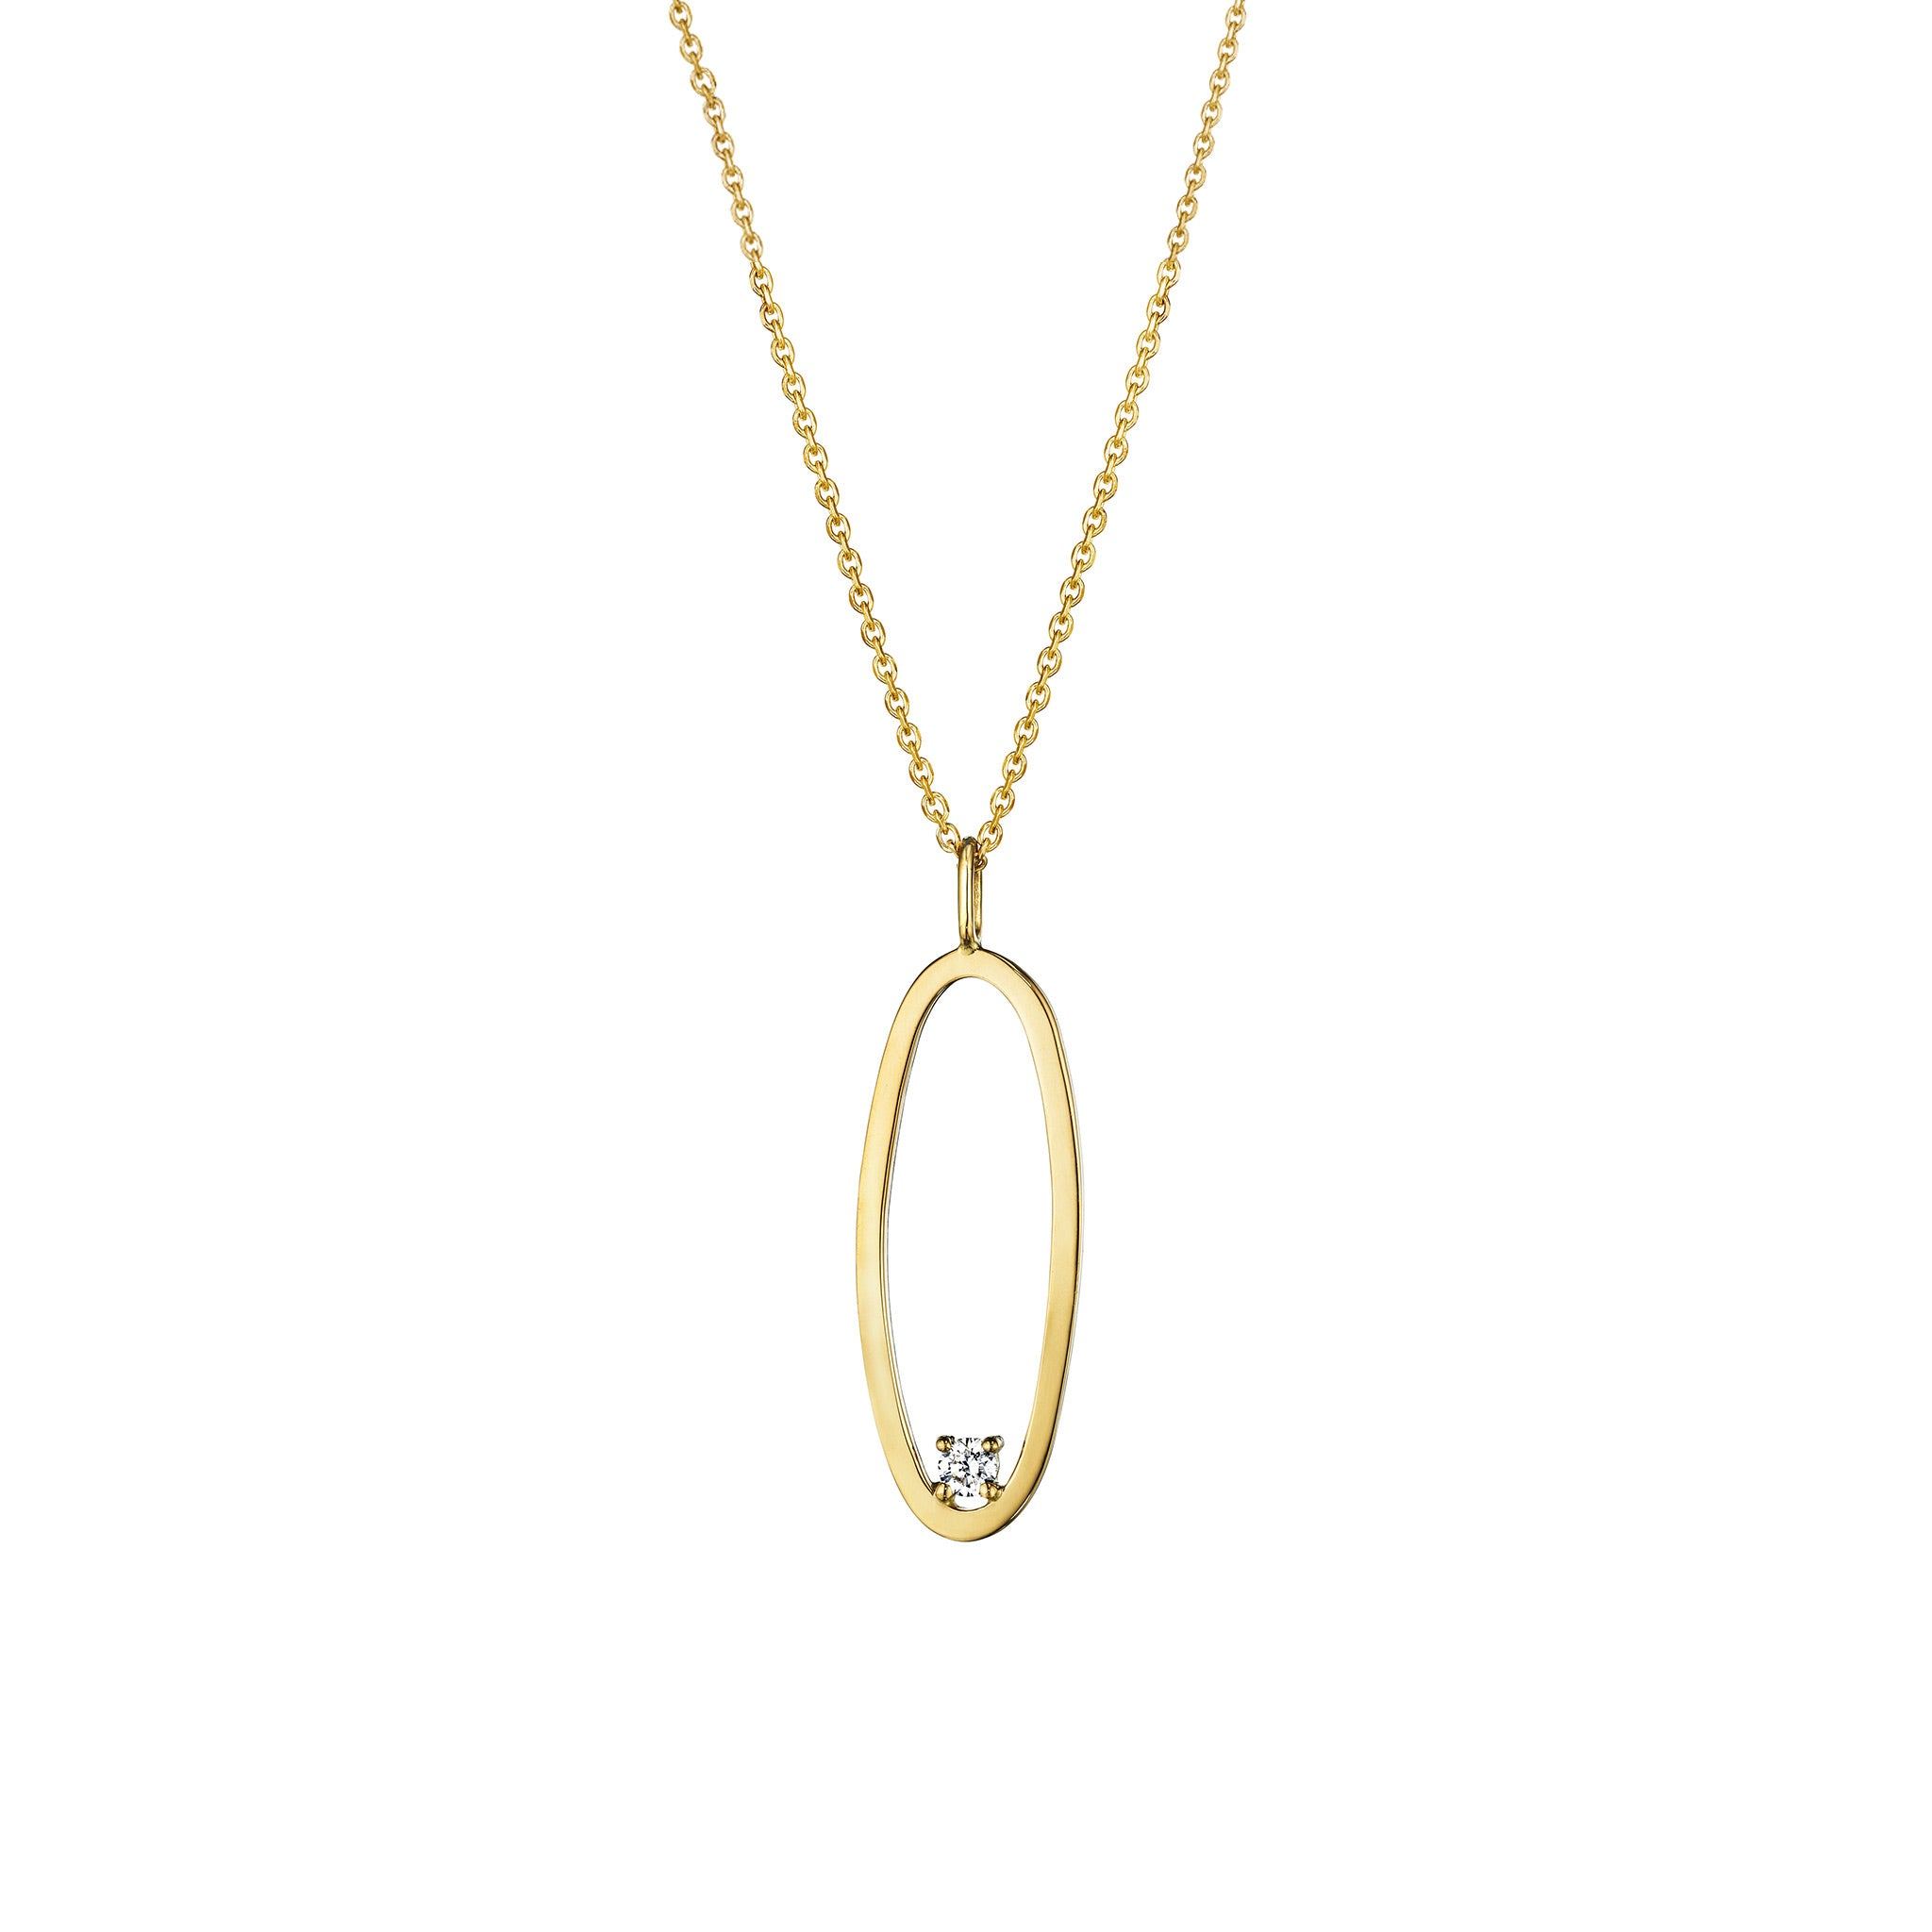 Buy Initial O Pendant Online From Kisna